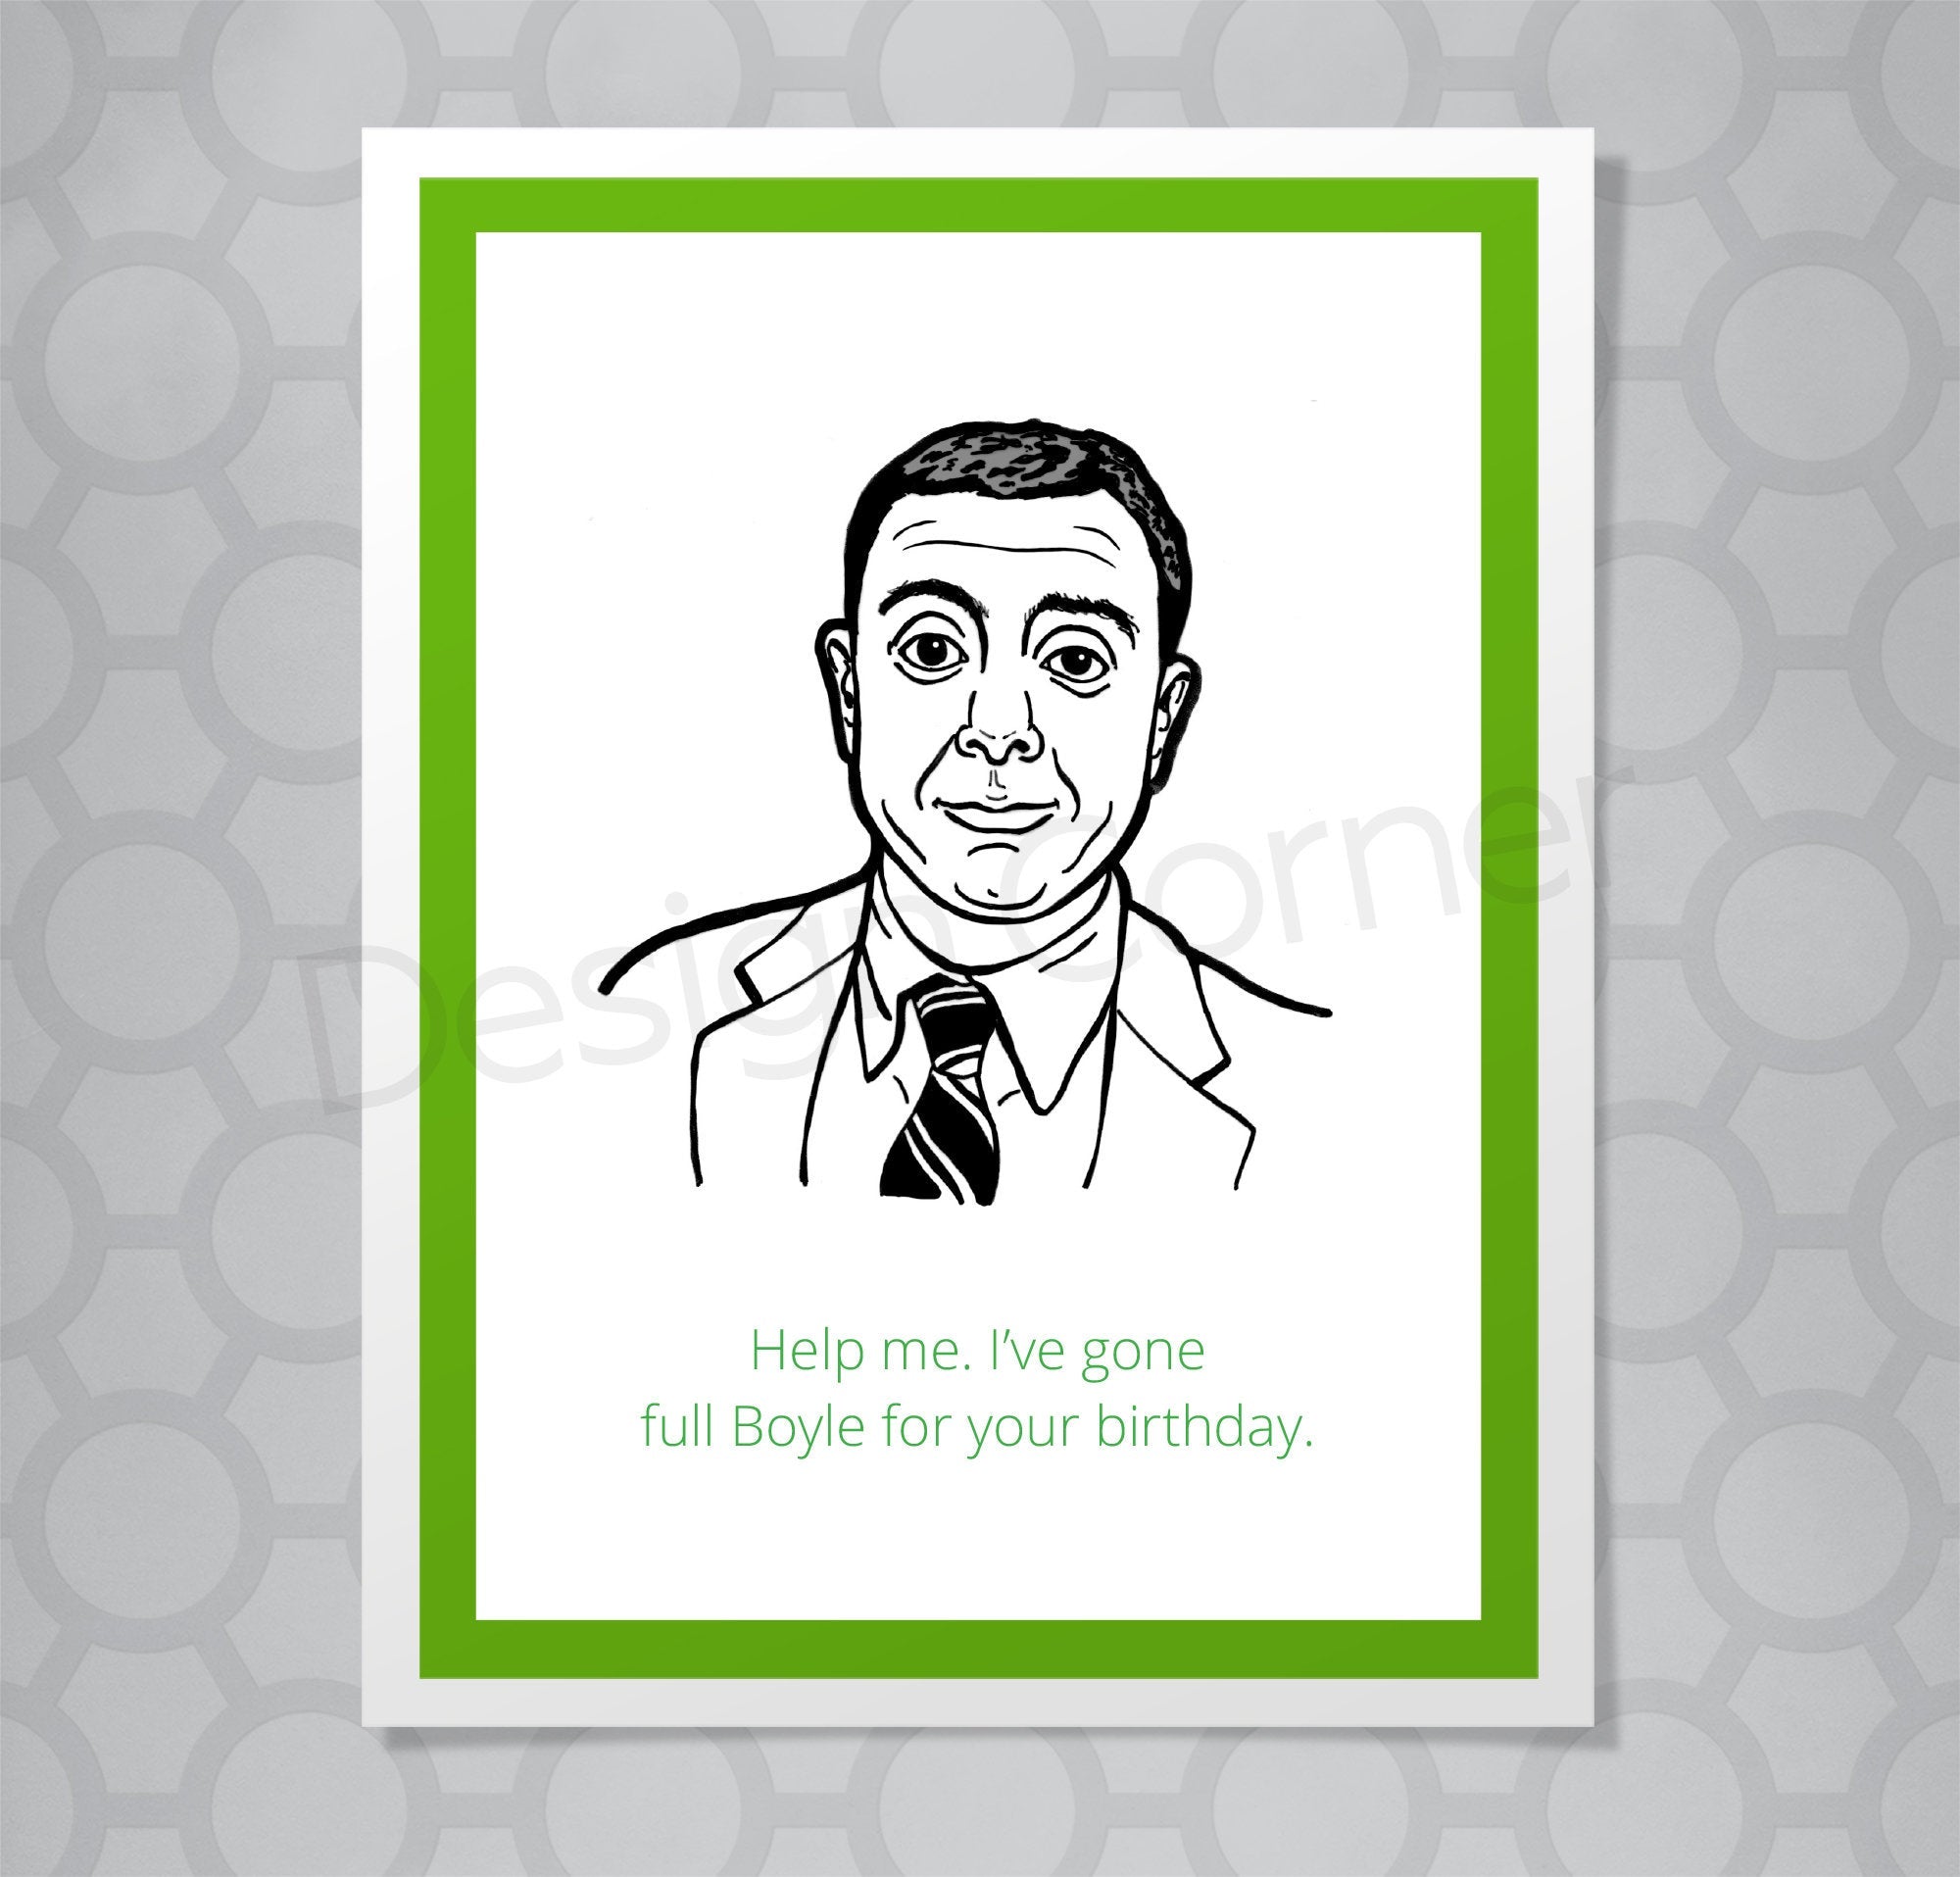 Greeting card with illustration of Brooklyn Nine Nine's Boyle. Caption says "Help me. I've gone full Boyle for your birthday."